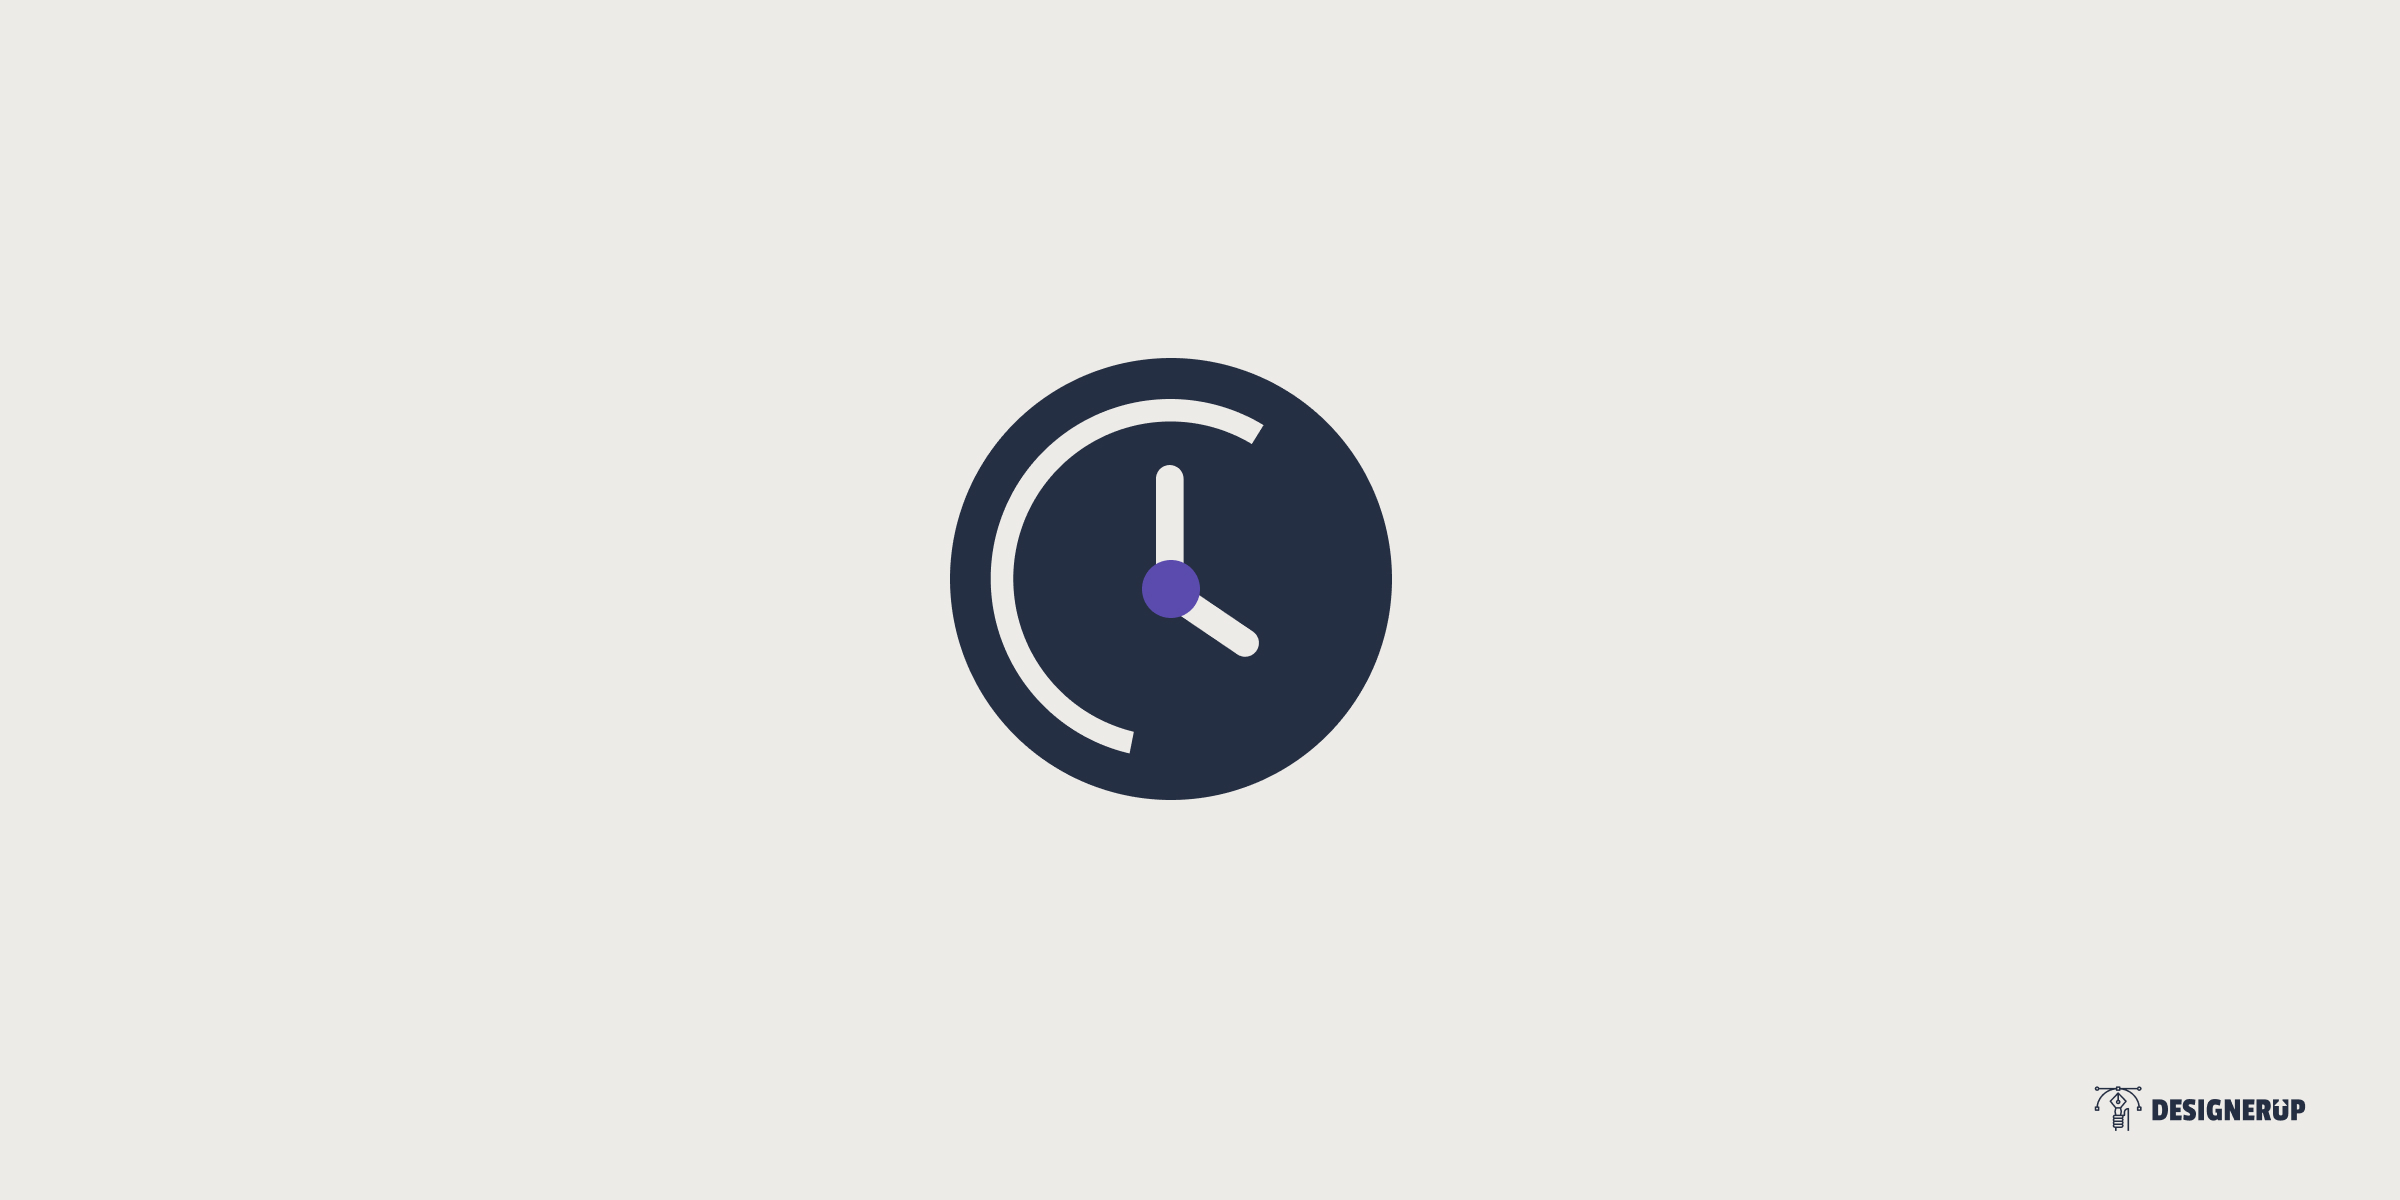 Clock timer in navy and purple